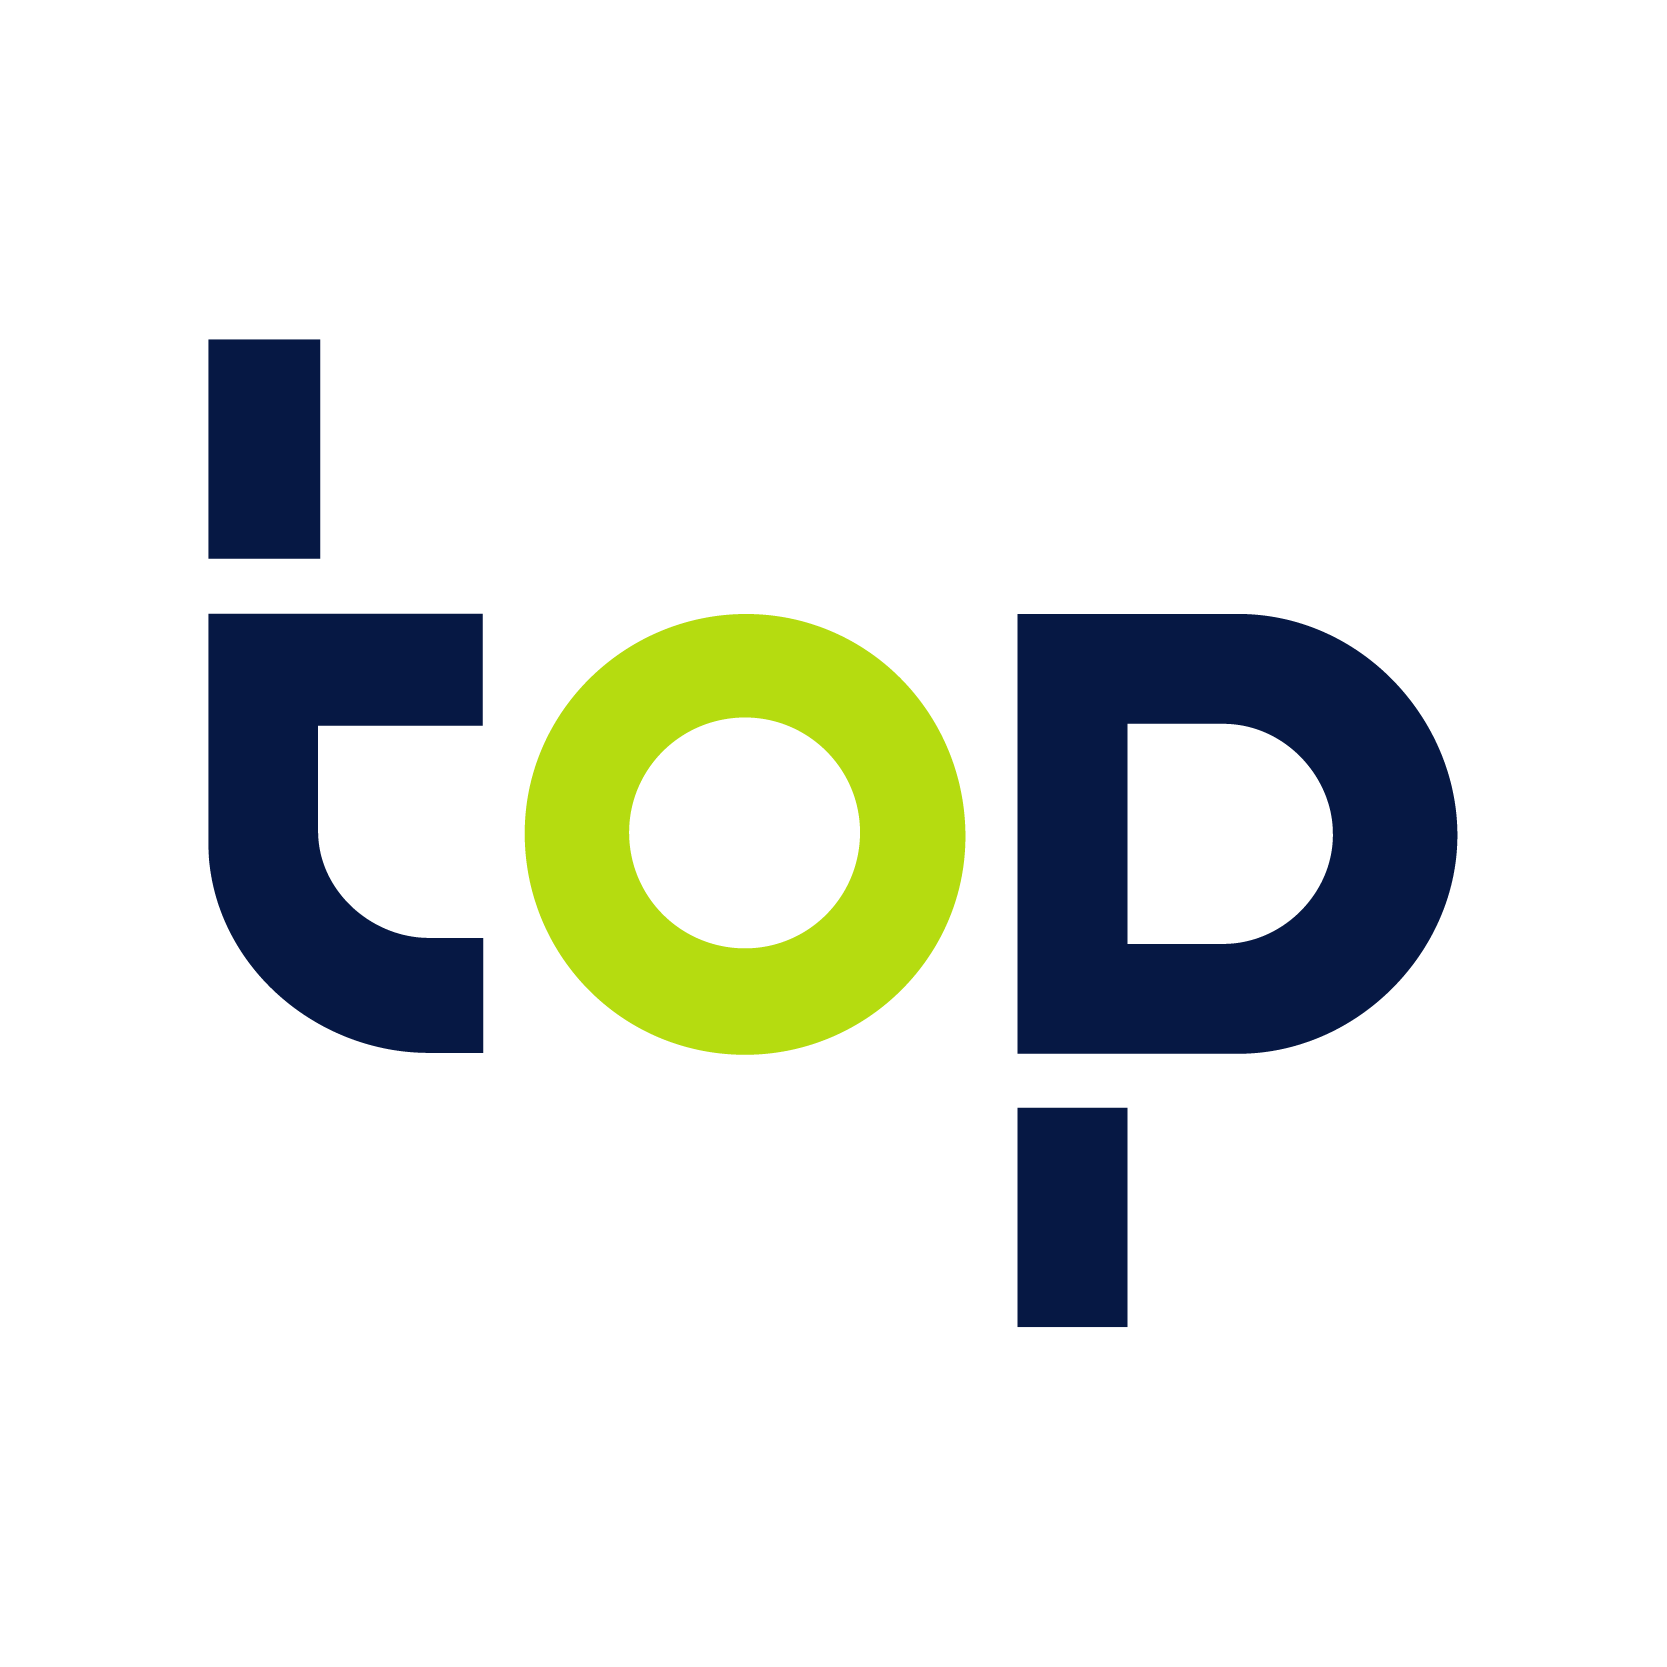 TOP is the innovation partner  specialised in Food Design, Process development and Innovation Management.